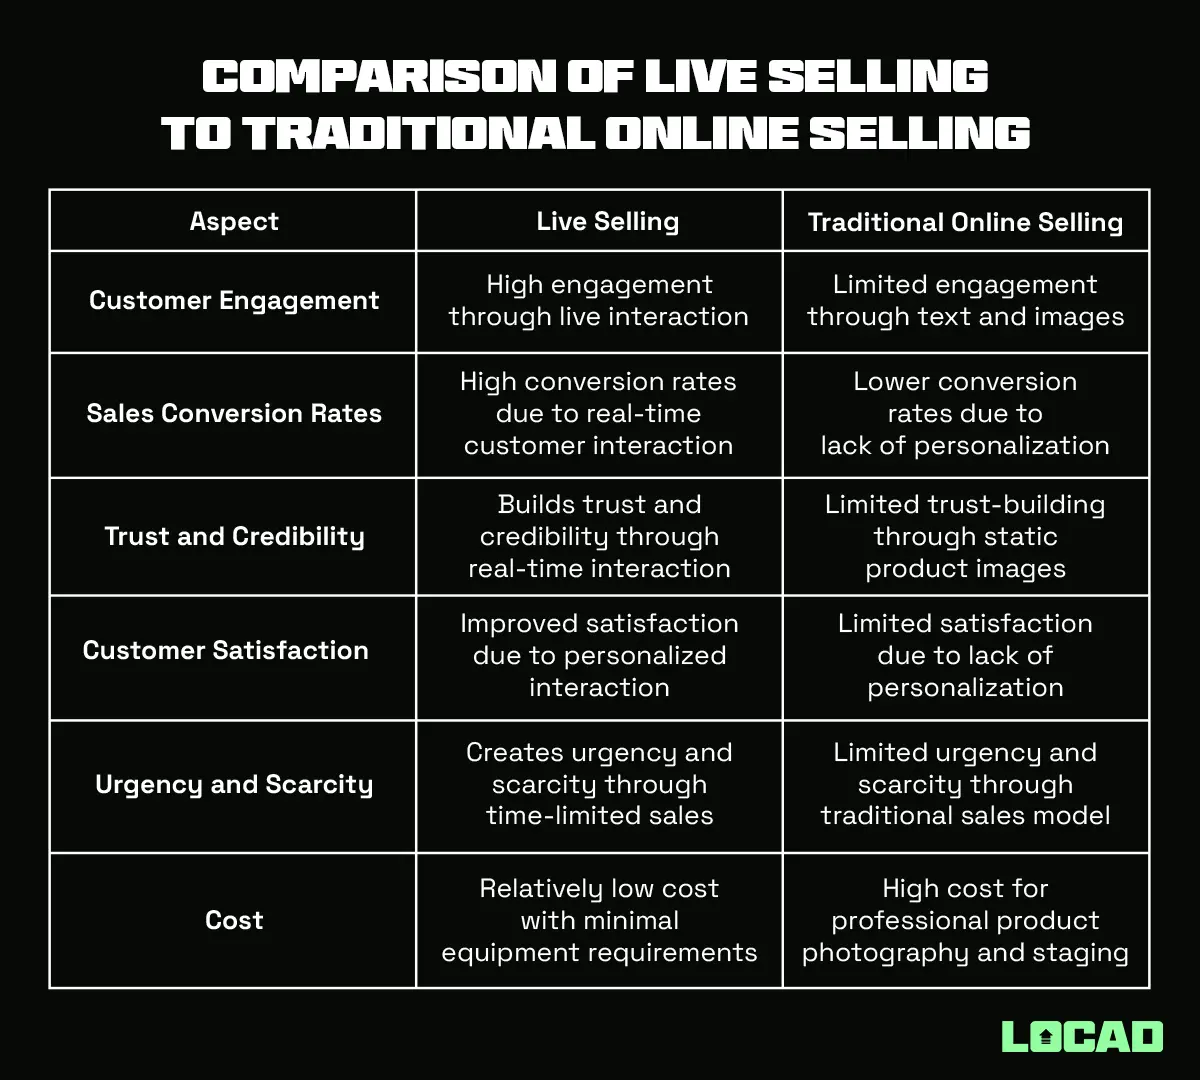 Comparison of Live Selling to traditional online selling